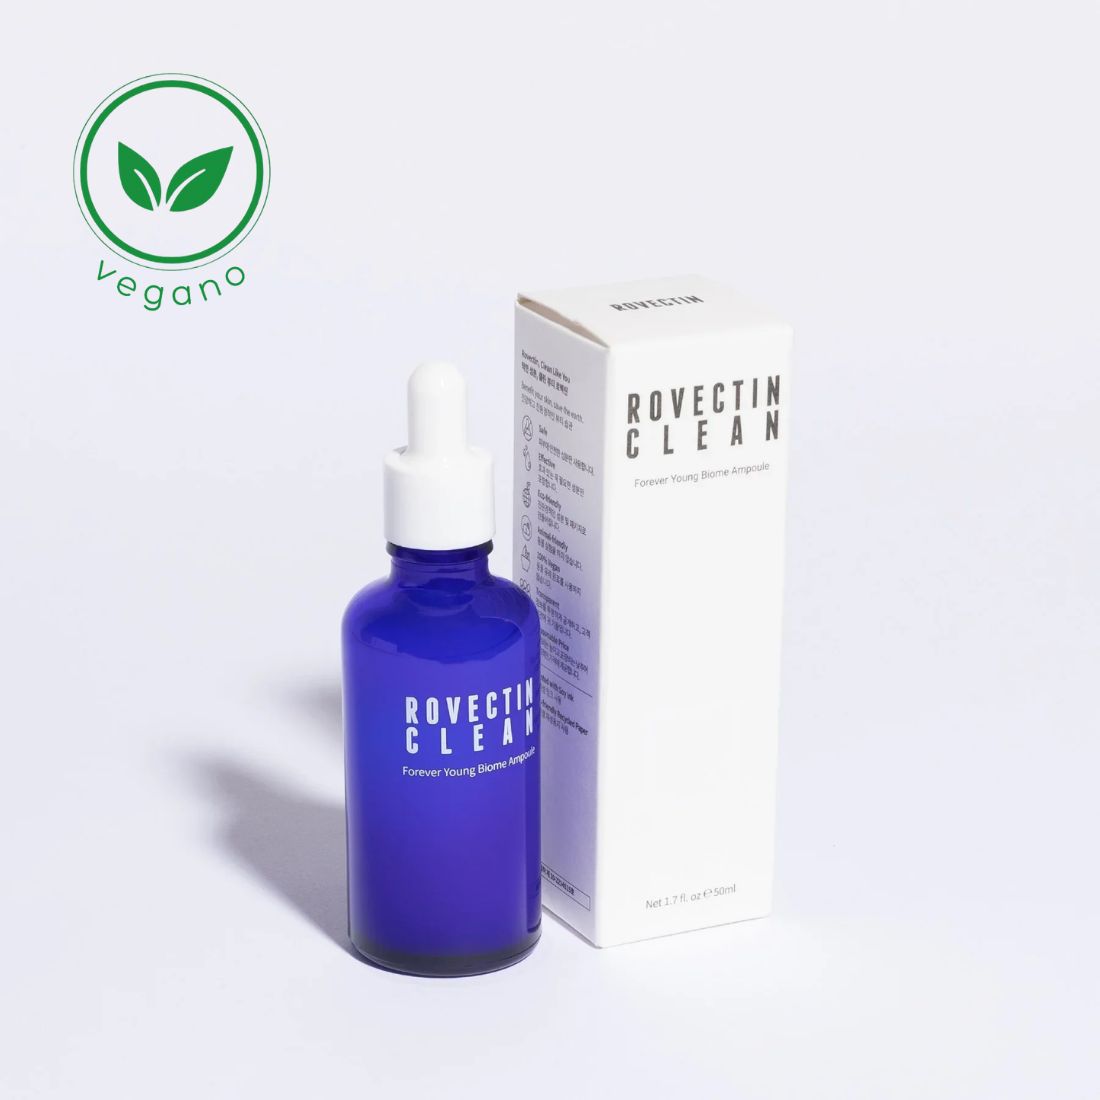 Rovectin - Clean Forever Young Biome Ampoule 50ml